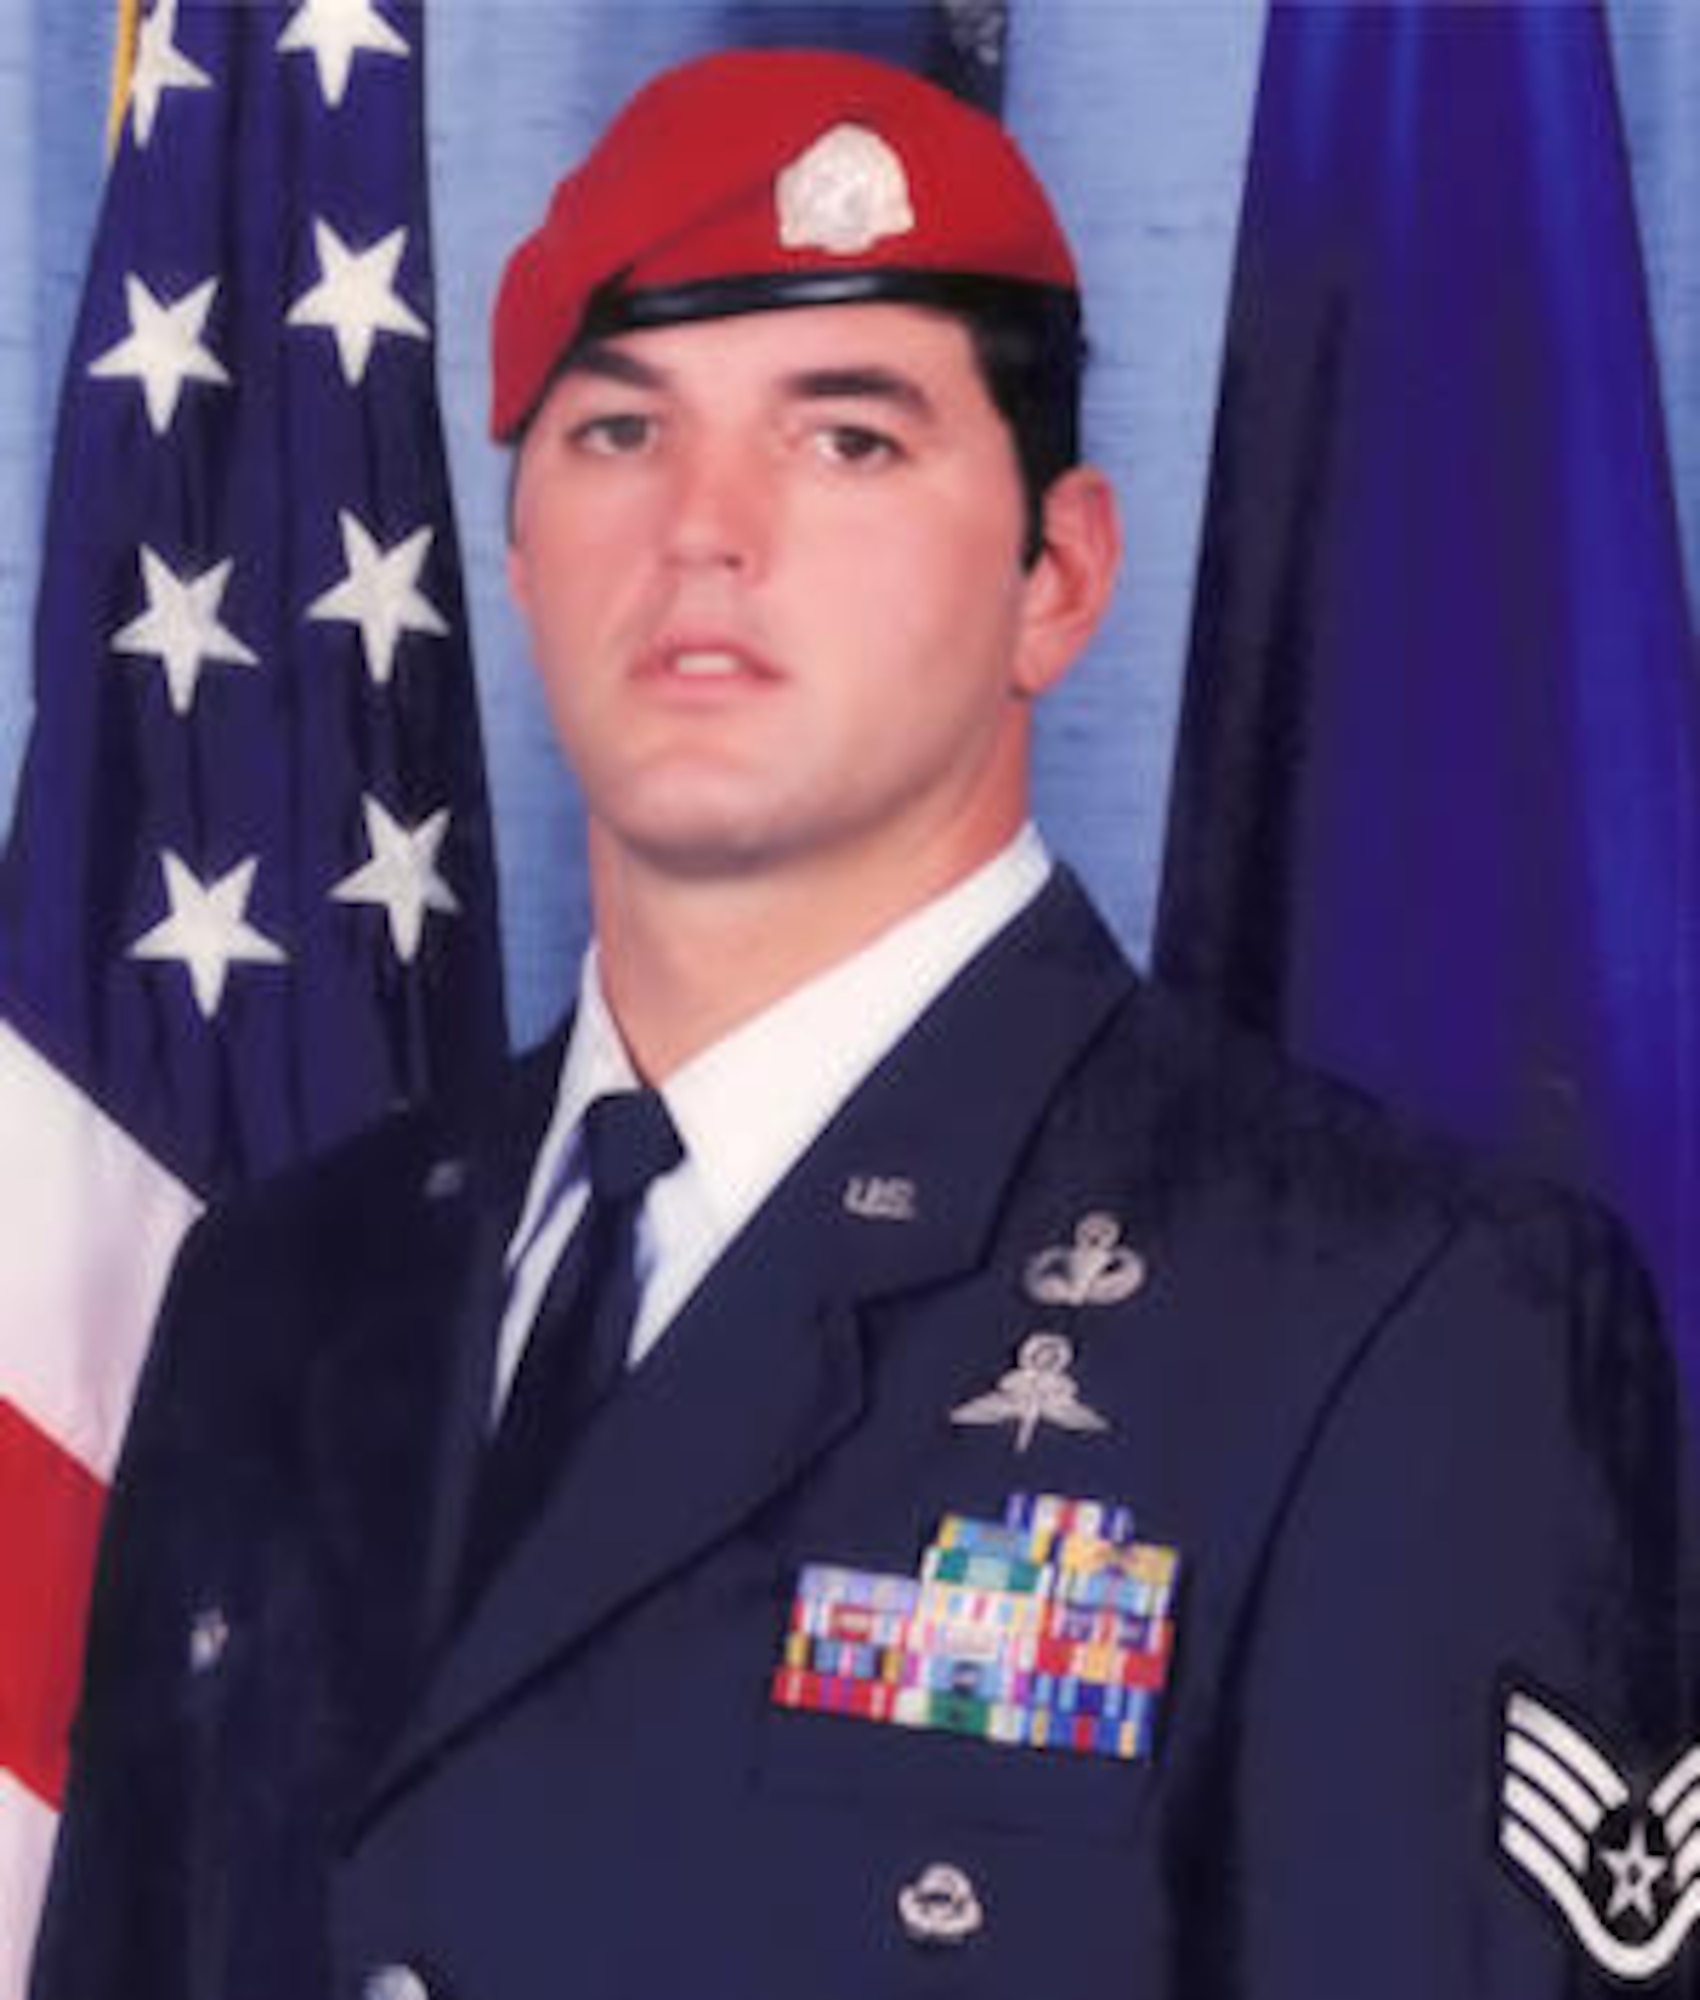 Tech. Sgt. (ret.) Jeffrey Bray, a combat controller, who was awarded the Silver Star medal for his actions during the Battle of Mogadishu in 1993, was laid to rest at Arlington National Cemetery, Va., on Dec. 30, 2016. Bray passed away at 49 years old on Oct. 24, leaving behind a far-reaching legacy of valor, professionalism and combat success. (Courtesy Photo)  